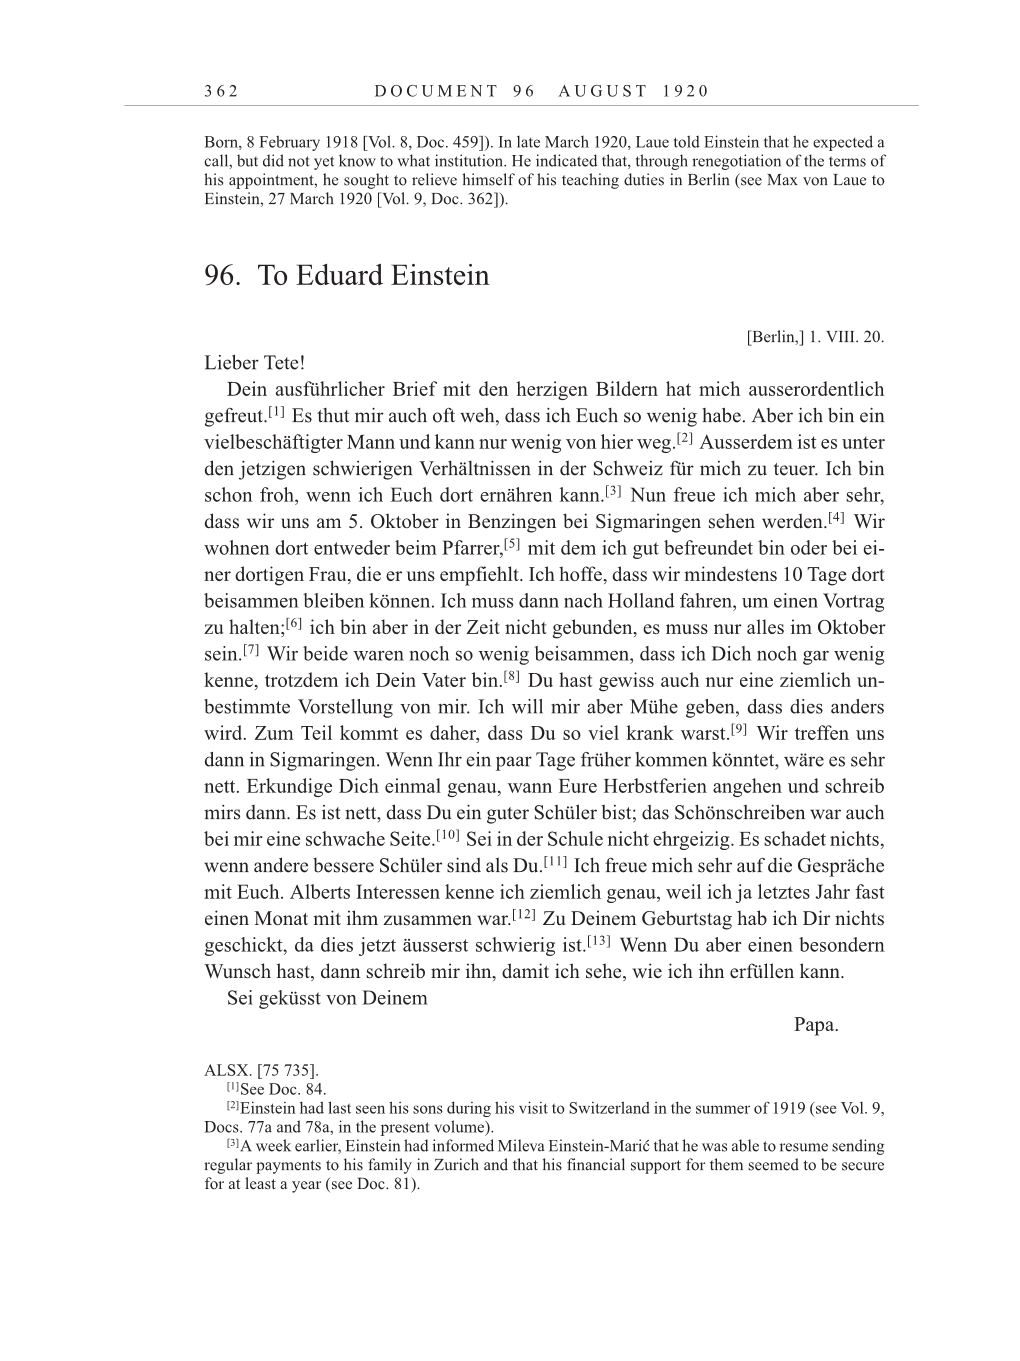 Volume 10: The Berlin Years: Correspondence May-December 1920 / Supplementary Correspondence 1909-1920 page 362